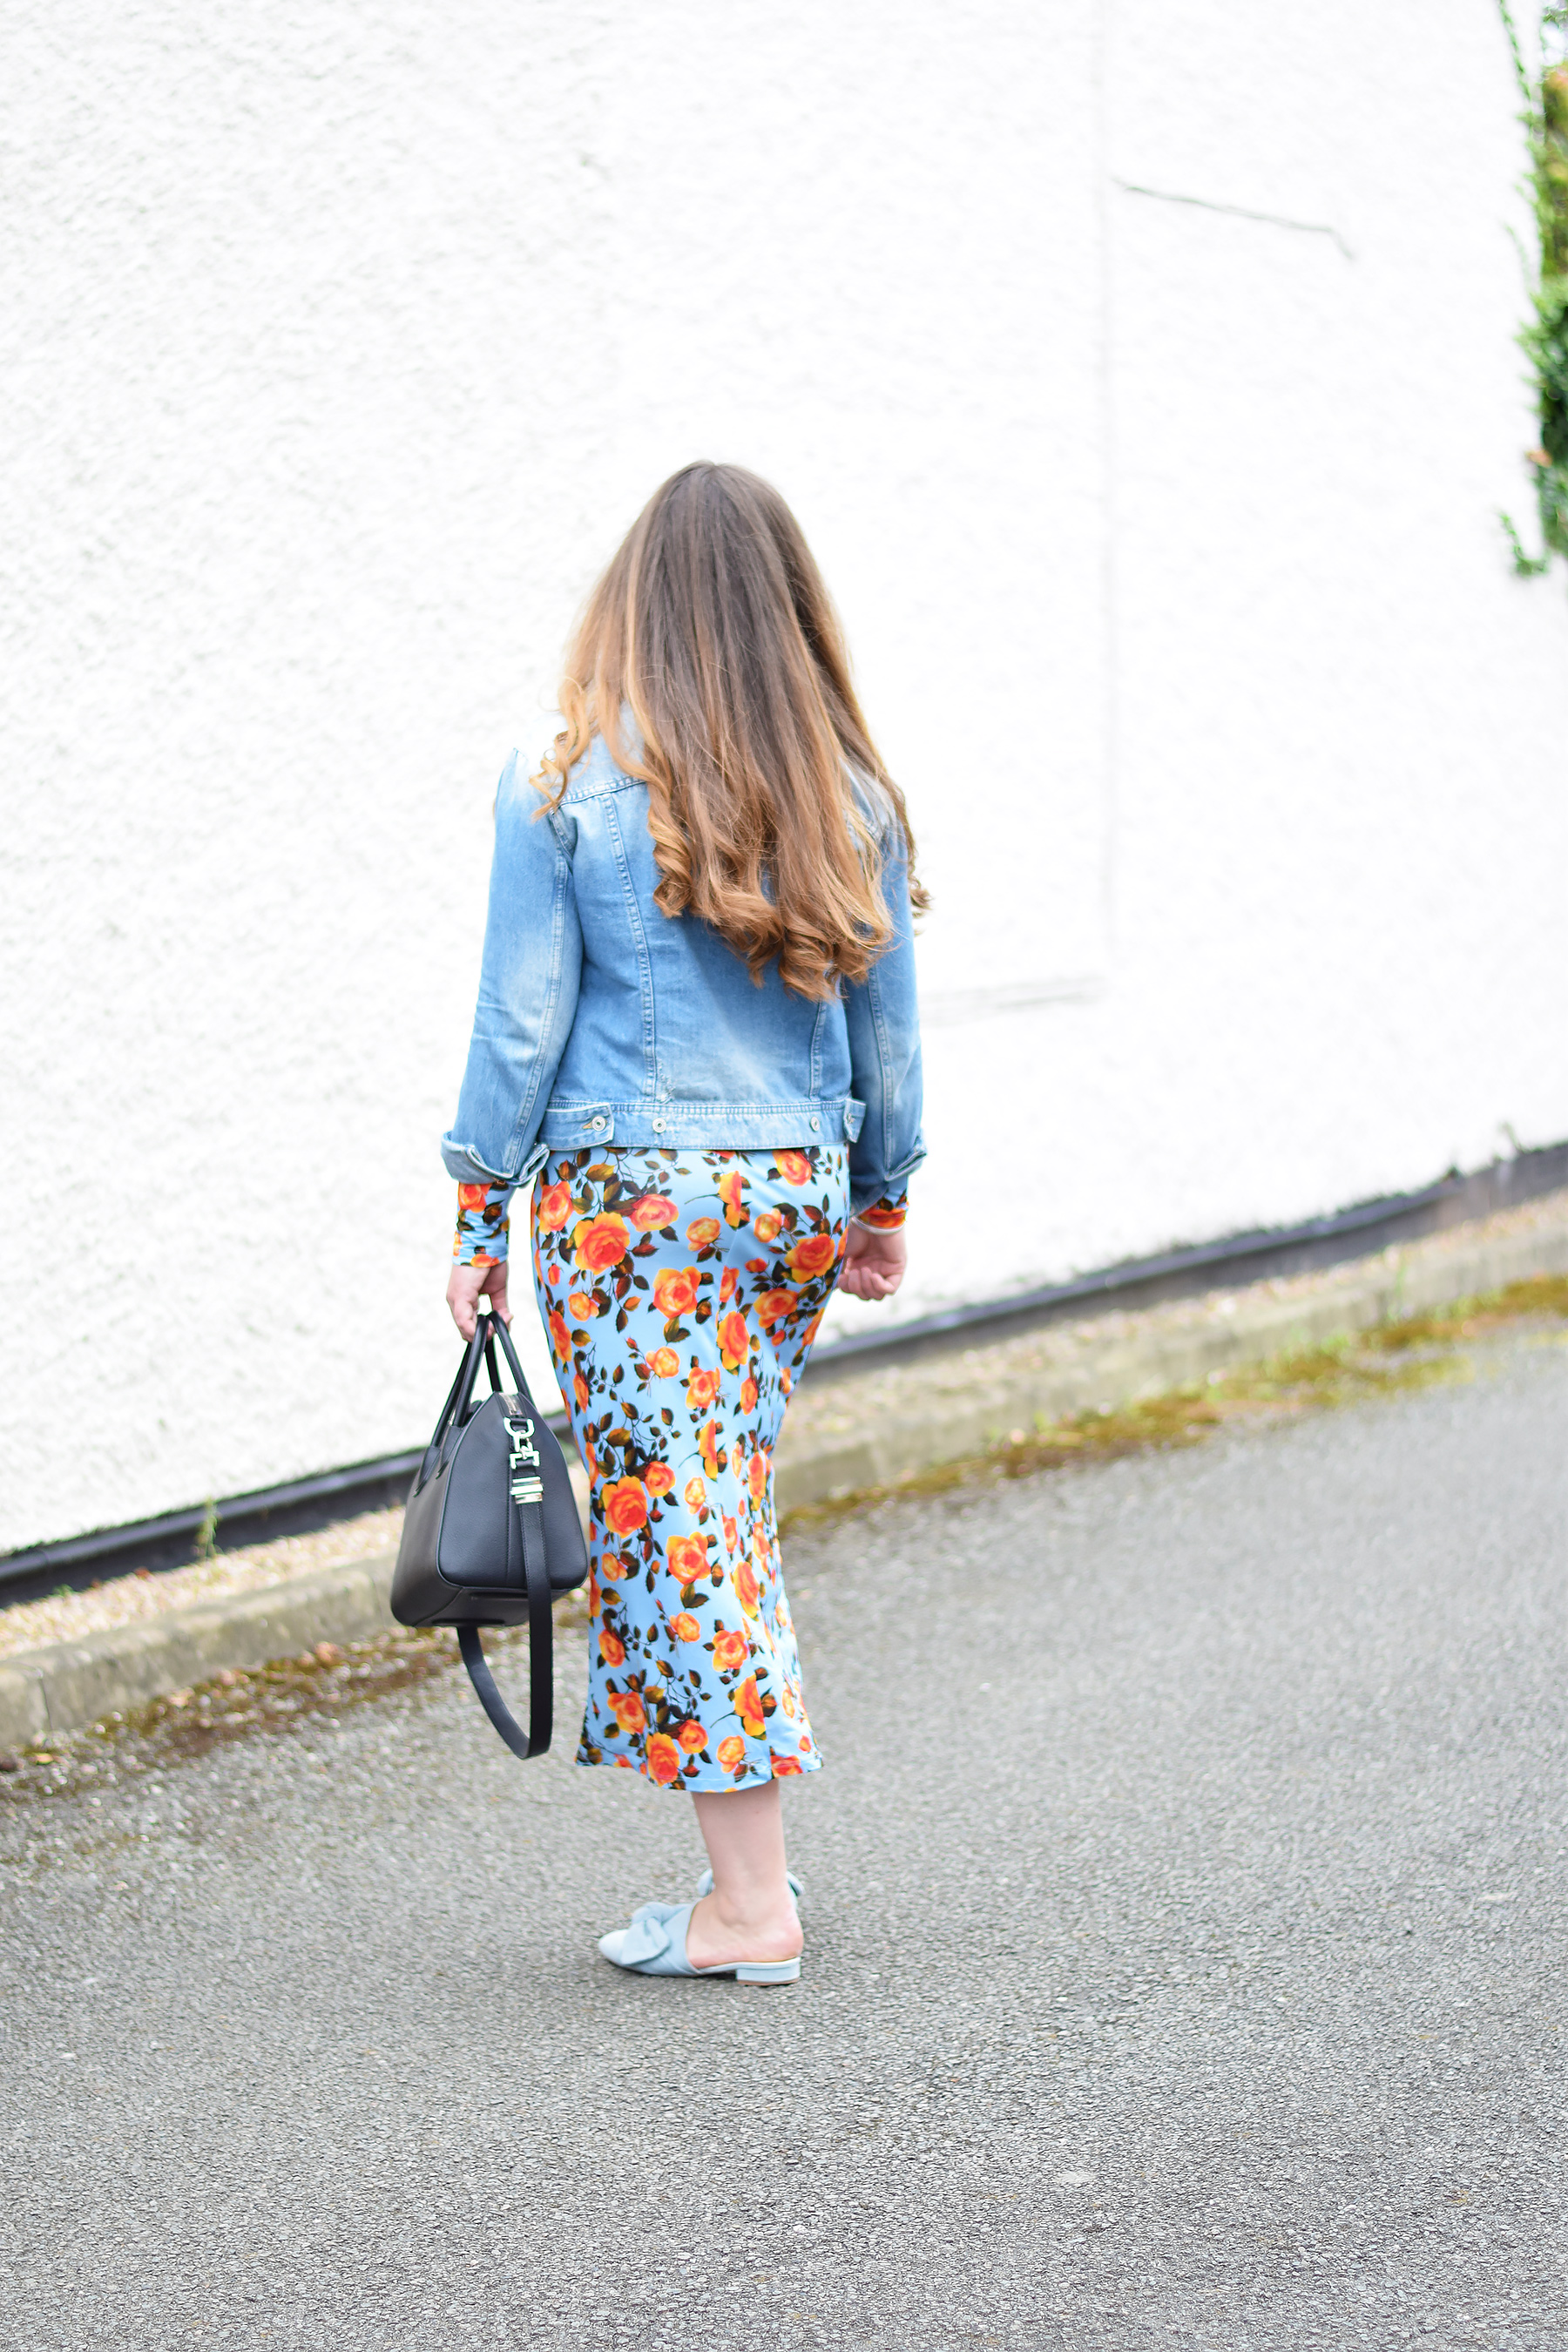 Zara blue floral dress with denim jacket and shoes